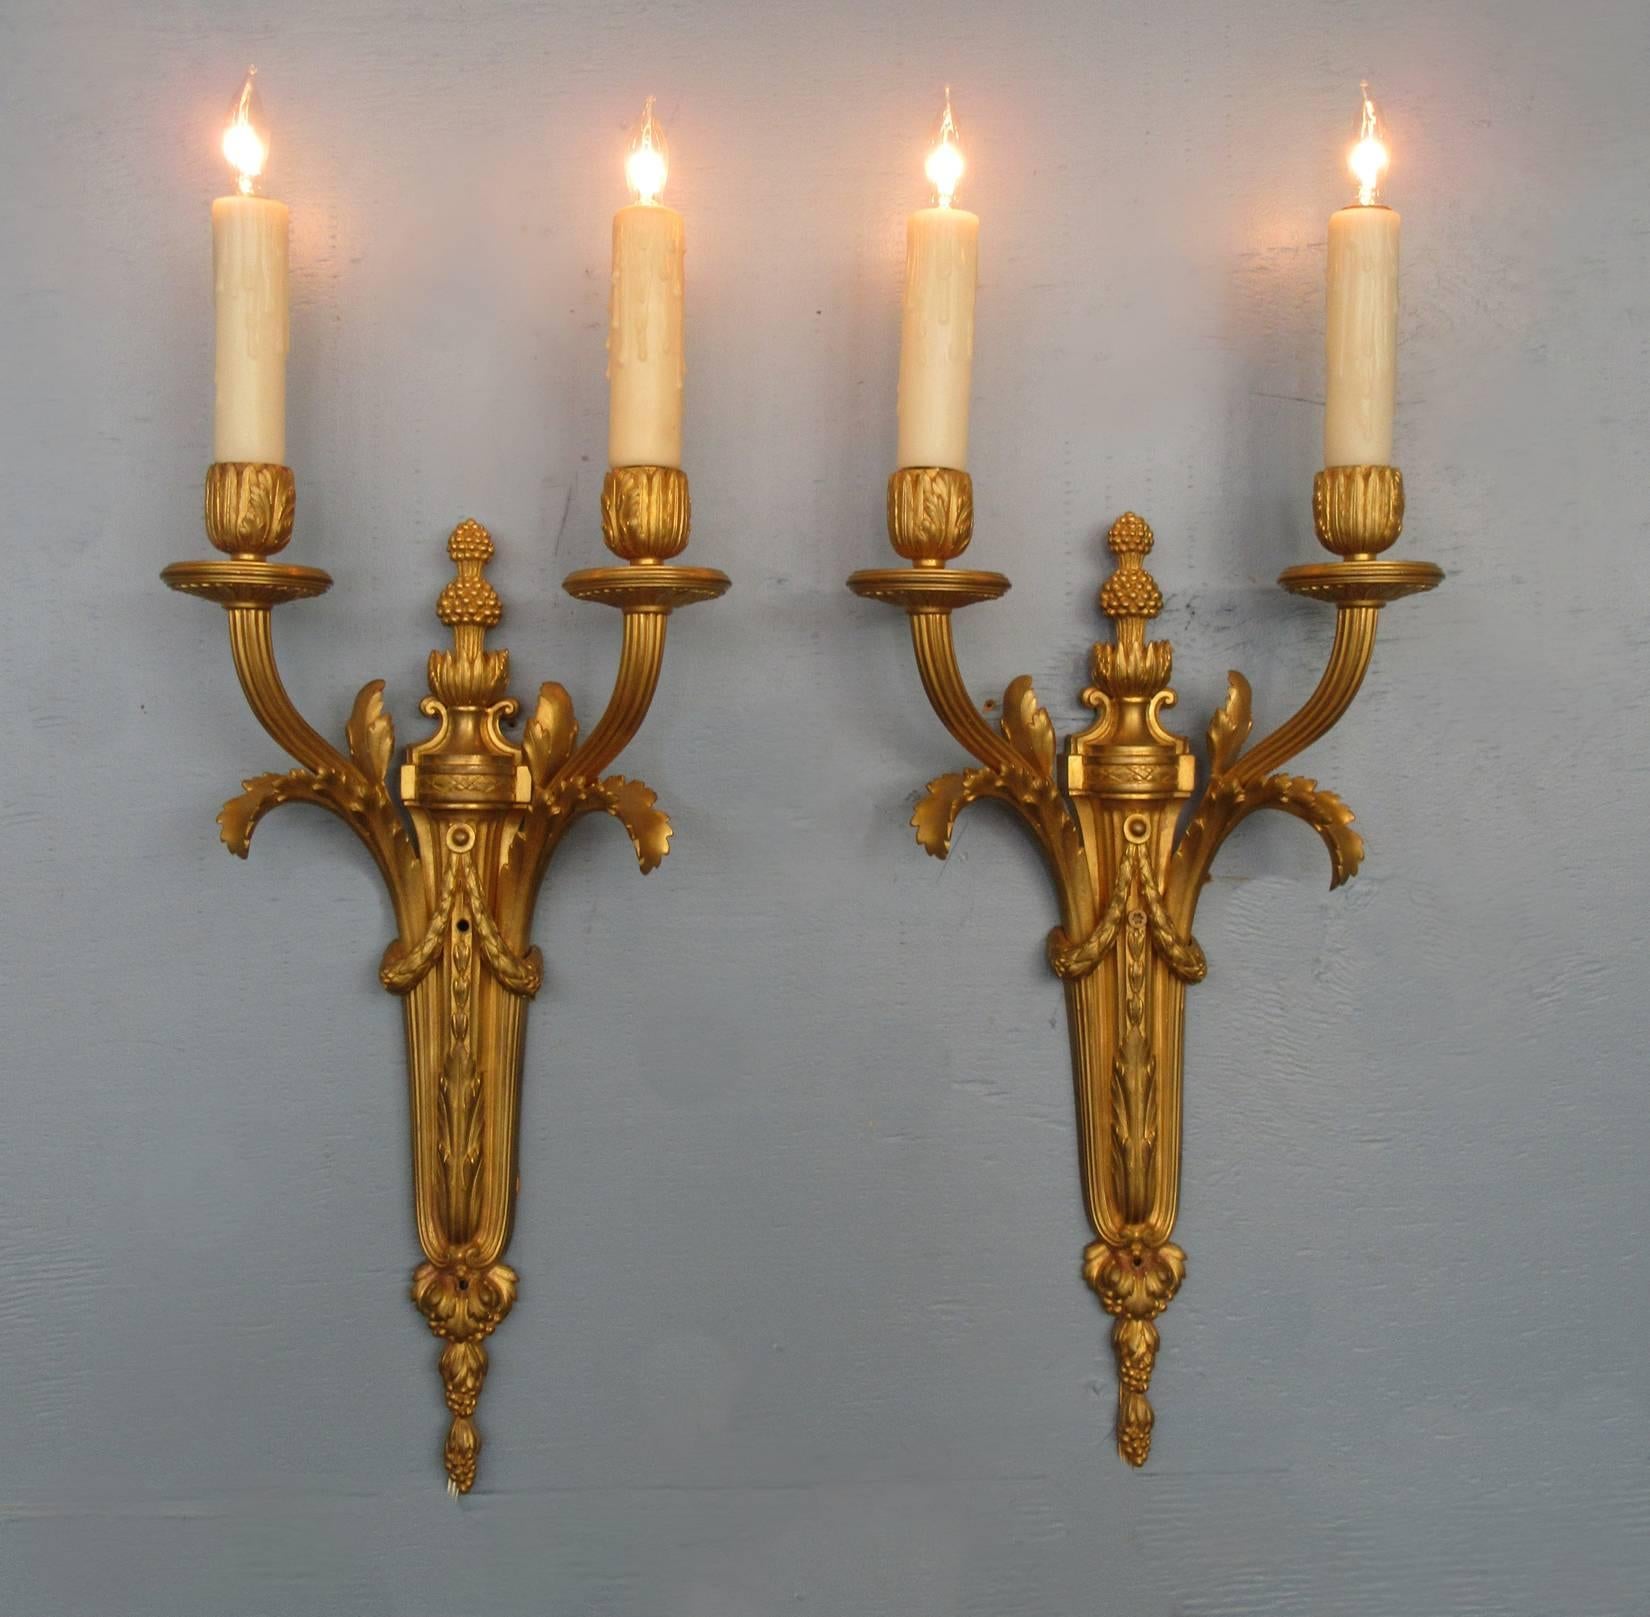 A finely cast pair of French Louis XVI bronze doré sconces, circa 1850, each two candle arms on a with quiver shaped base with foliate and floral details.